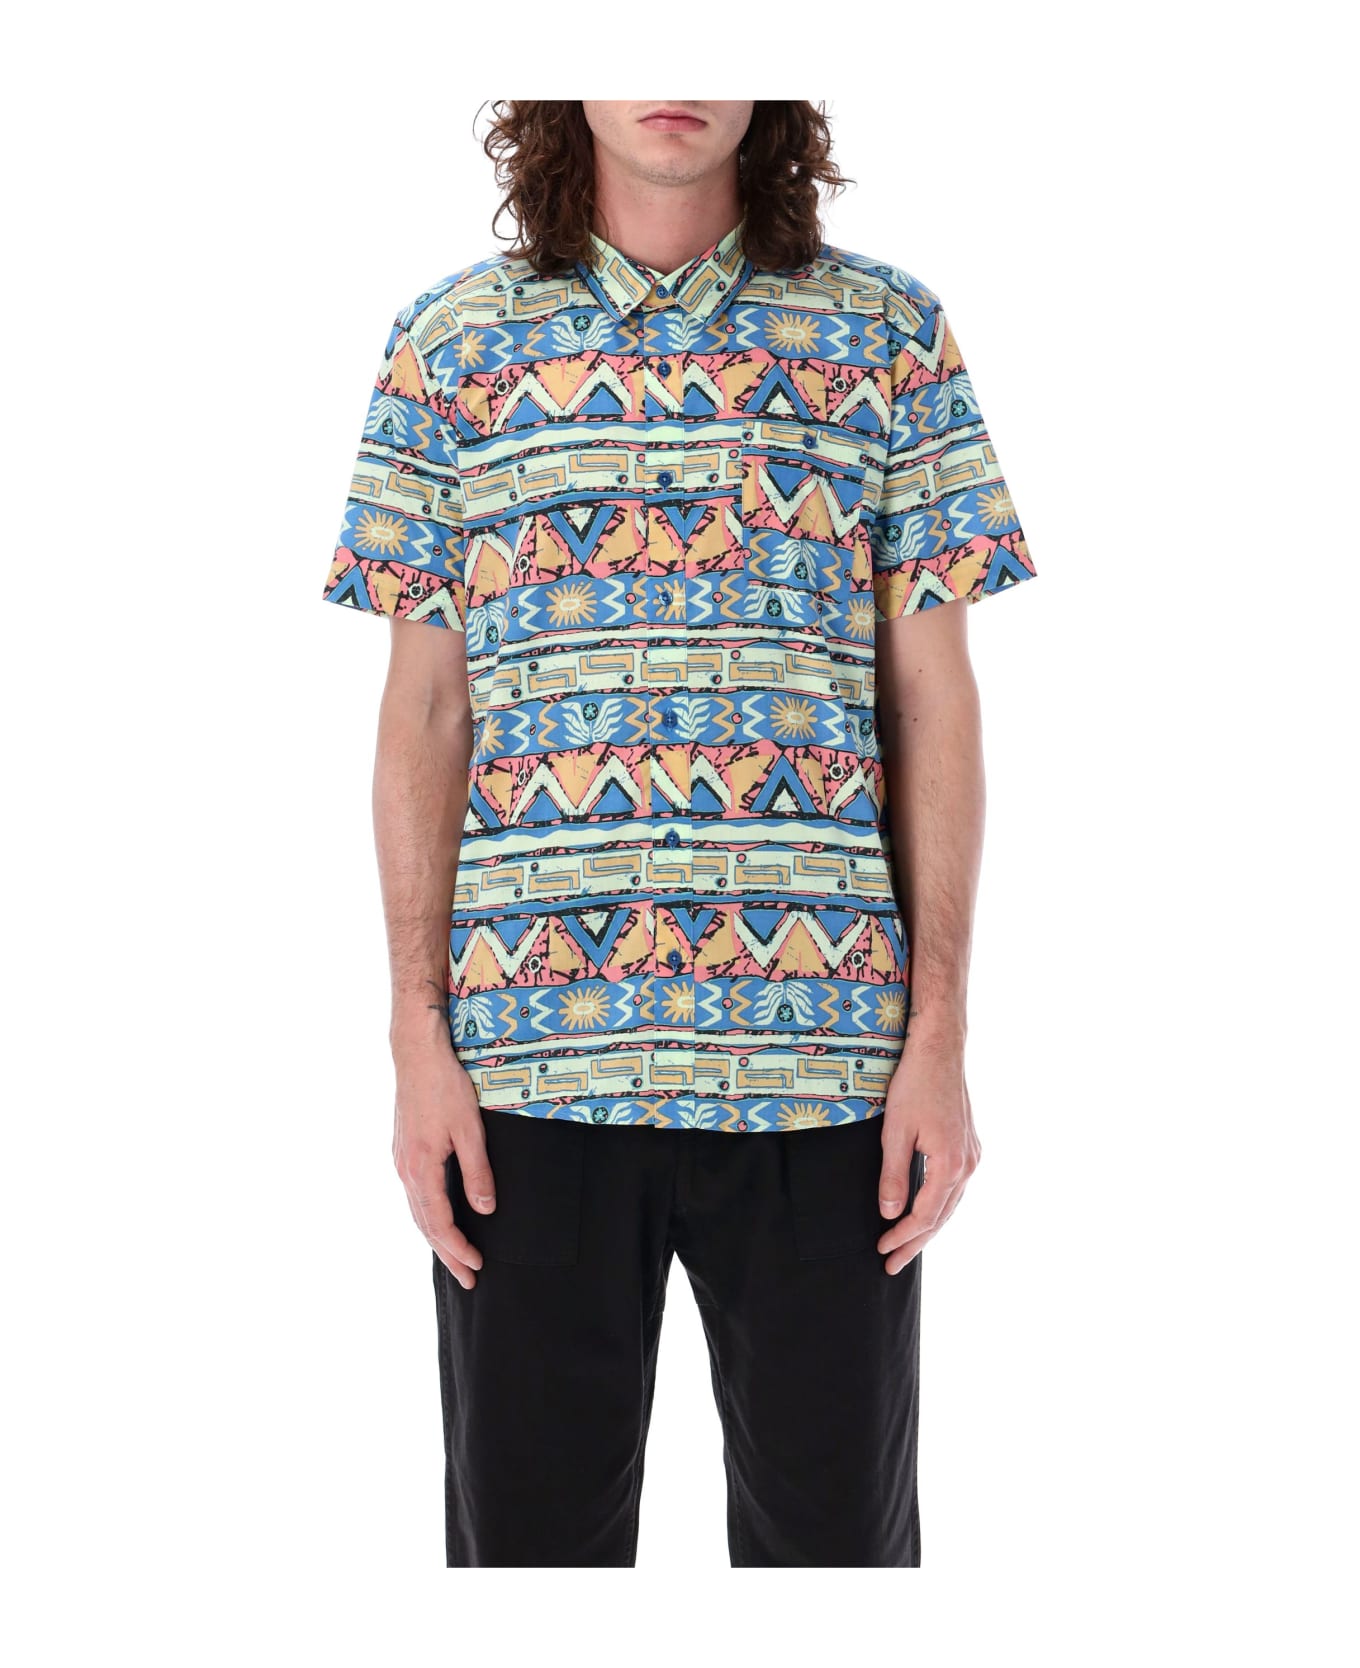 Patagonia Go To Shirt - MULTICOLOR